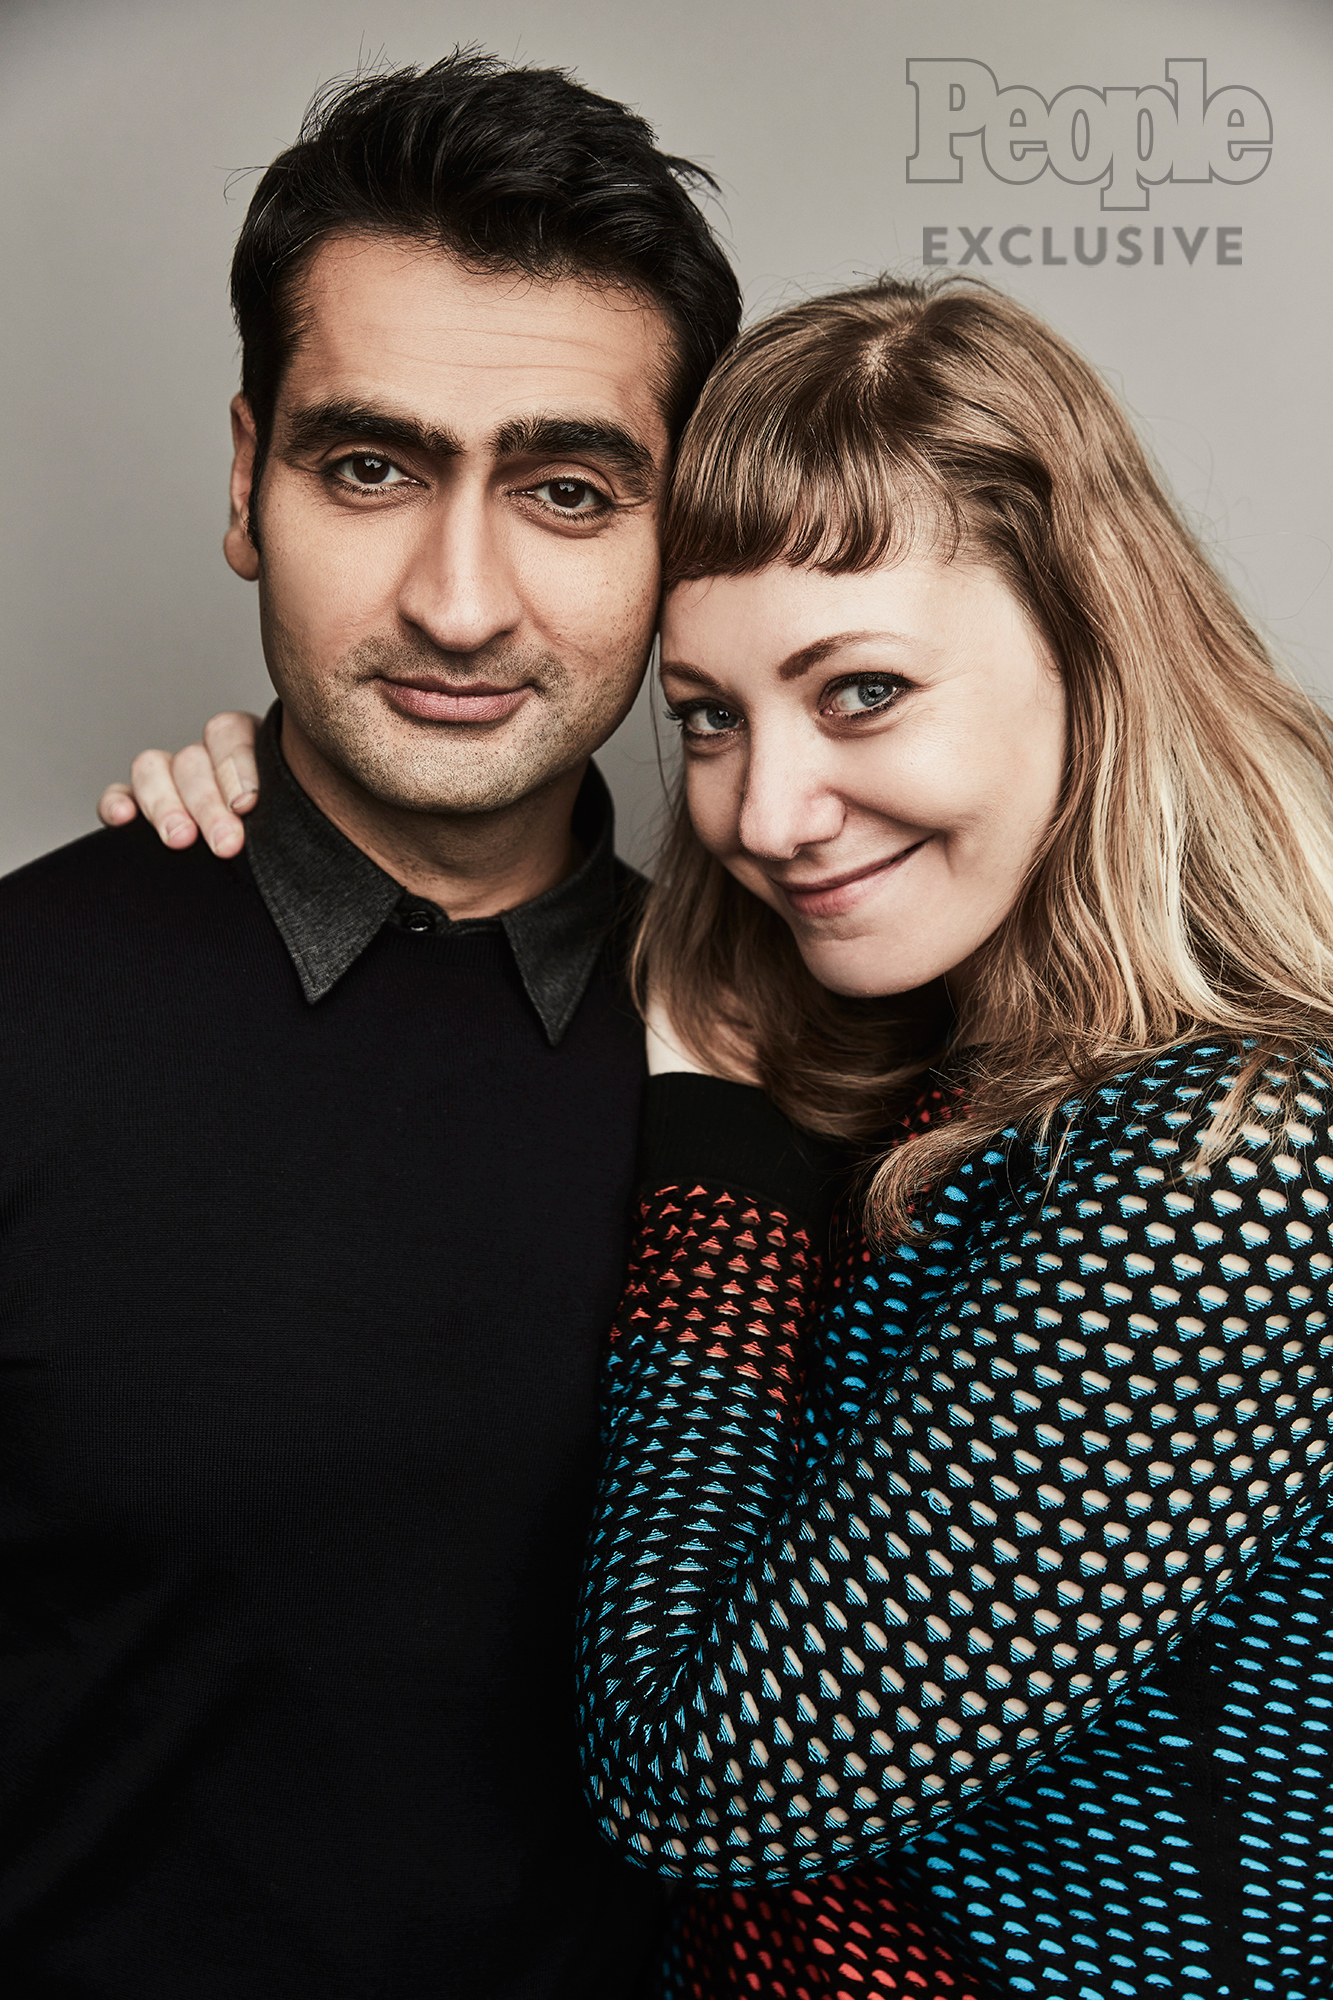 The Real Life Story Of Couple Behind Big Sick